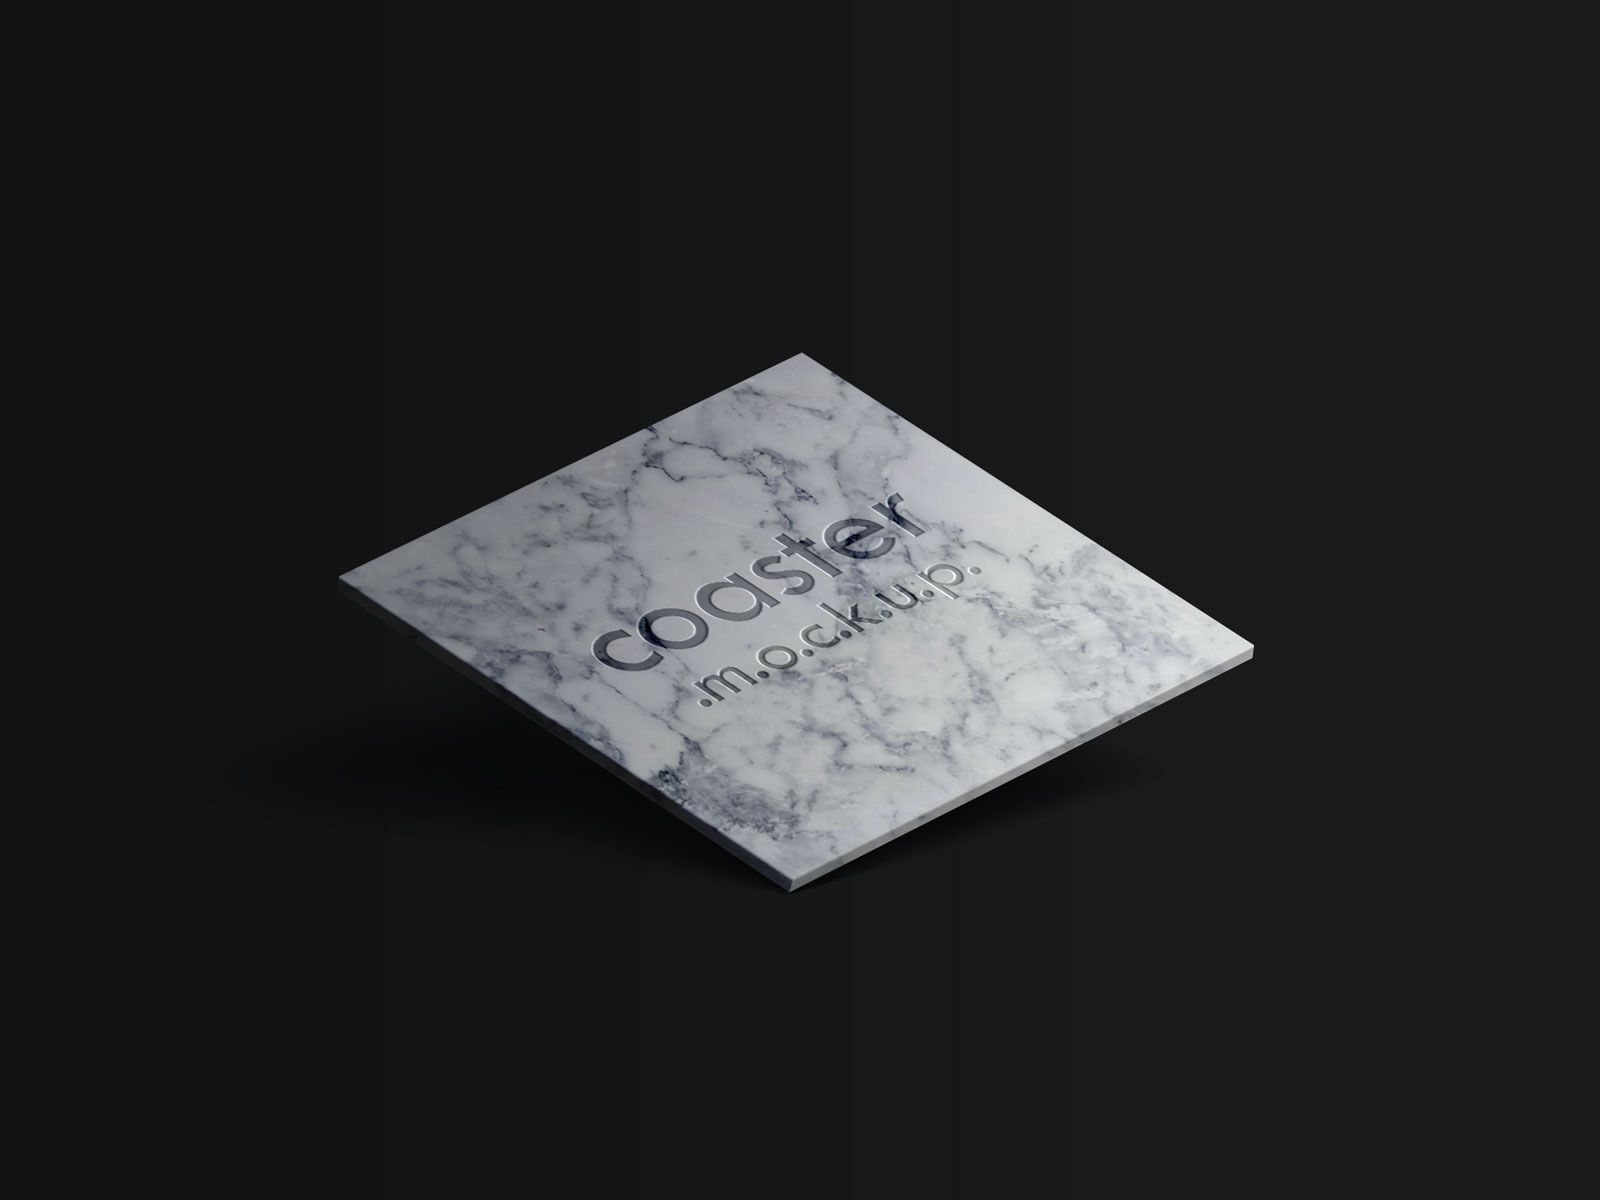 3/4 View of a Square Coaster With an Engraved Logo Mockup FREE PSD